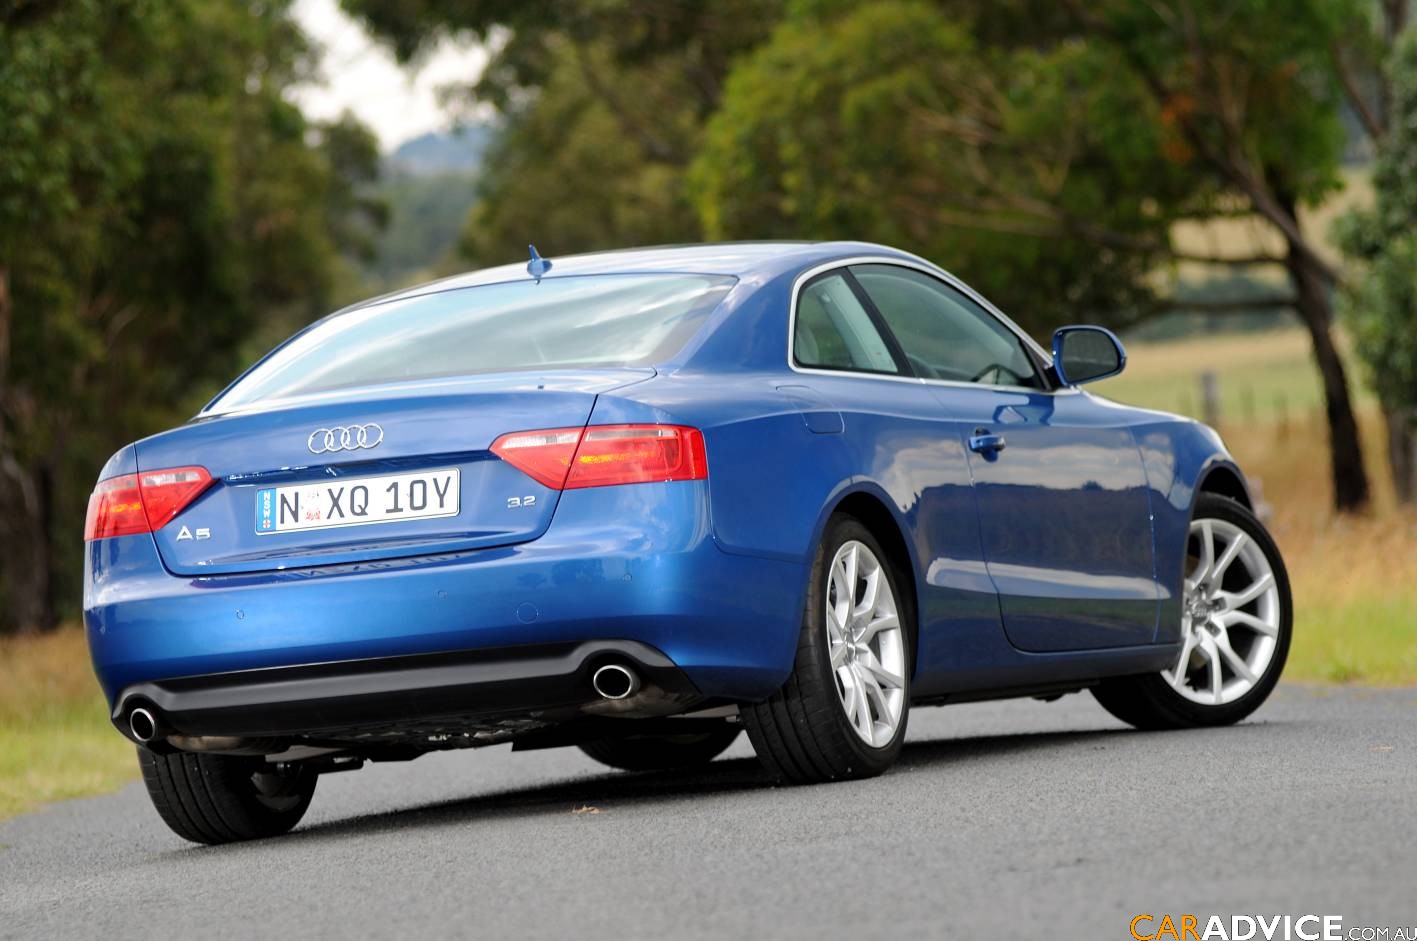 Audi adds to its A5 Coupe line up photos CarAdvice